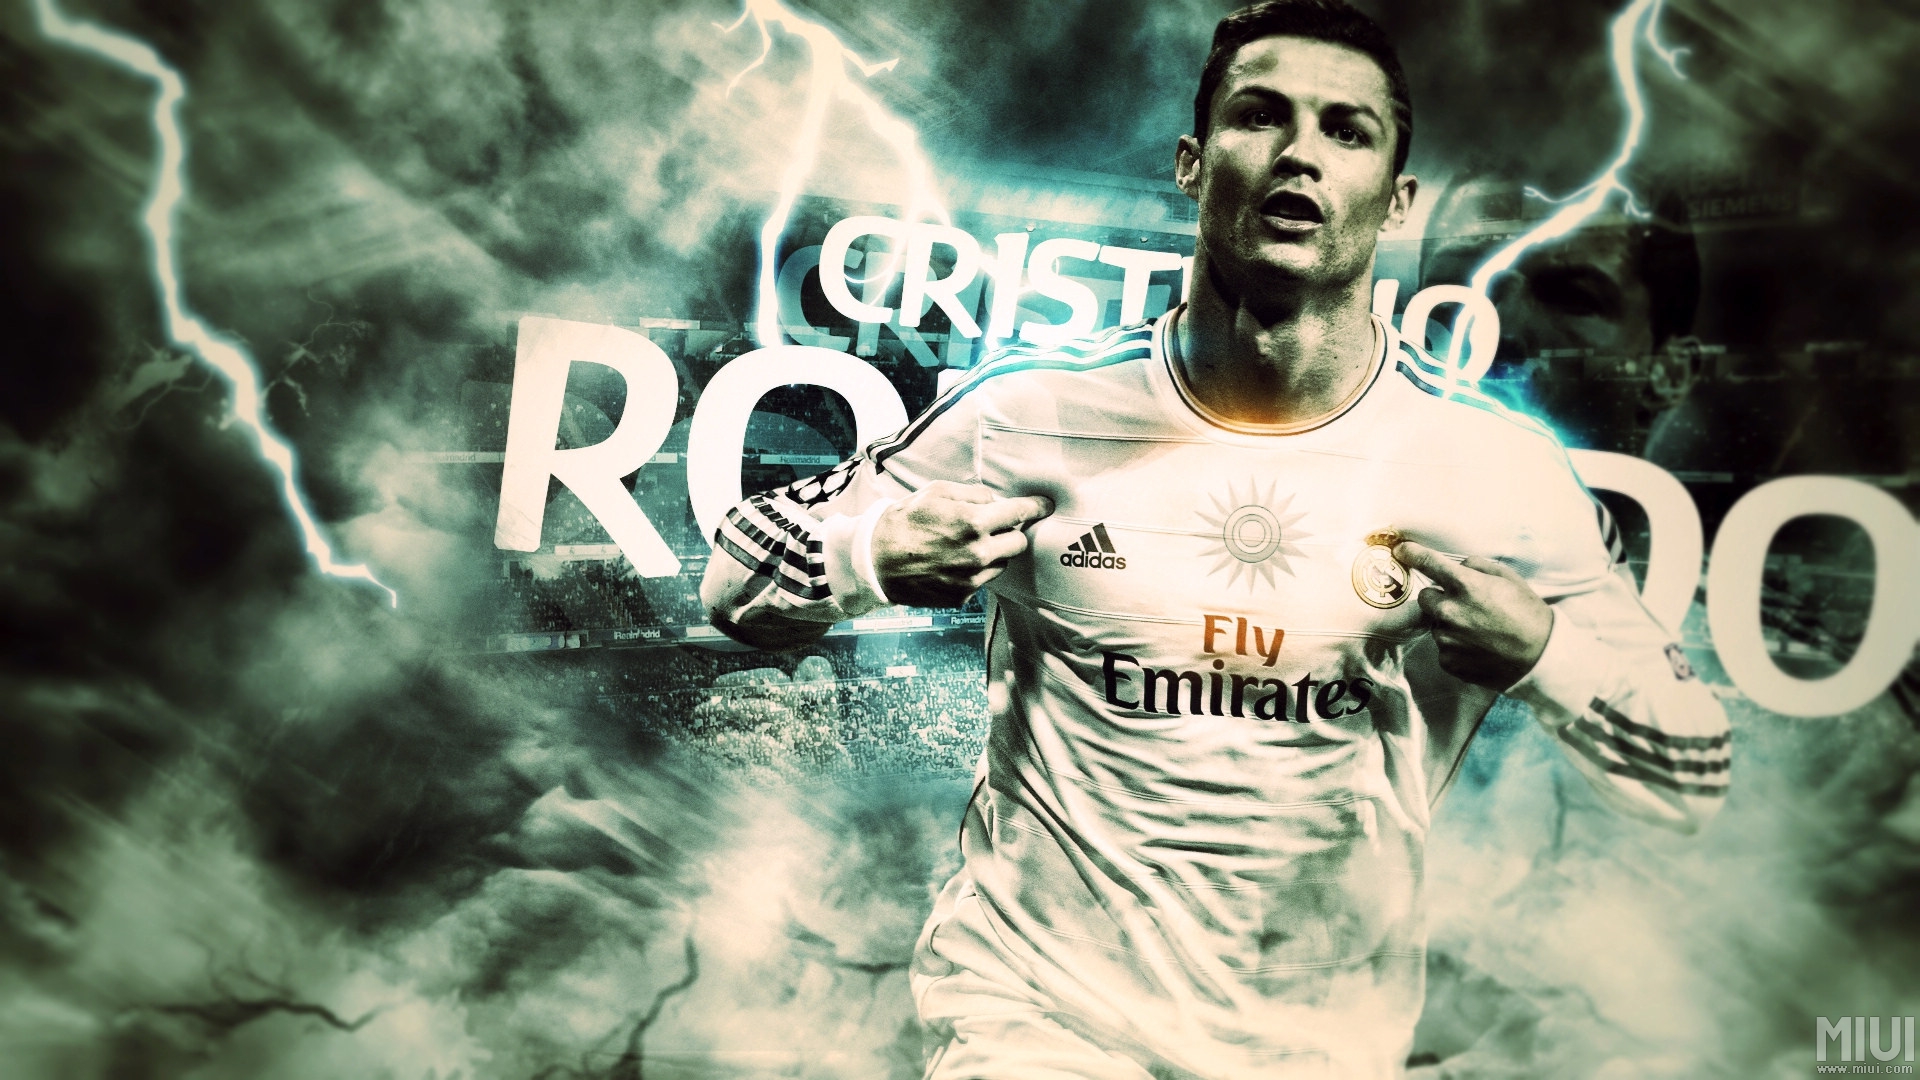 cr7 wallpaper download,font,cool,graphic design,photography,football player